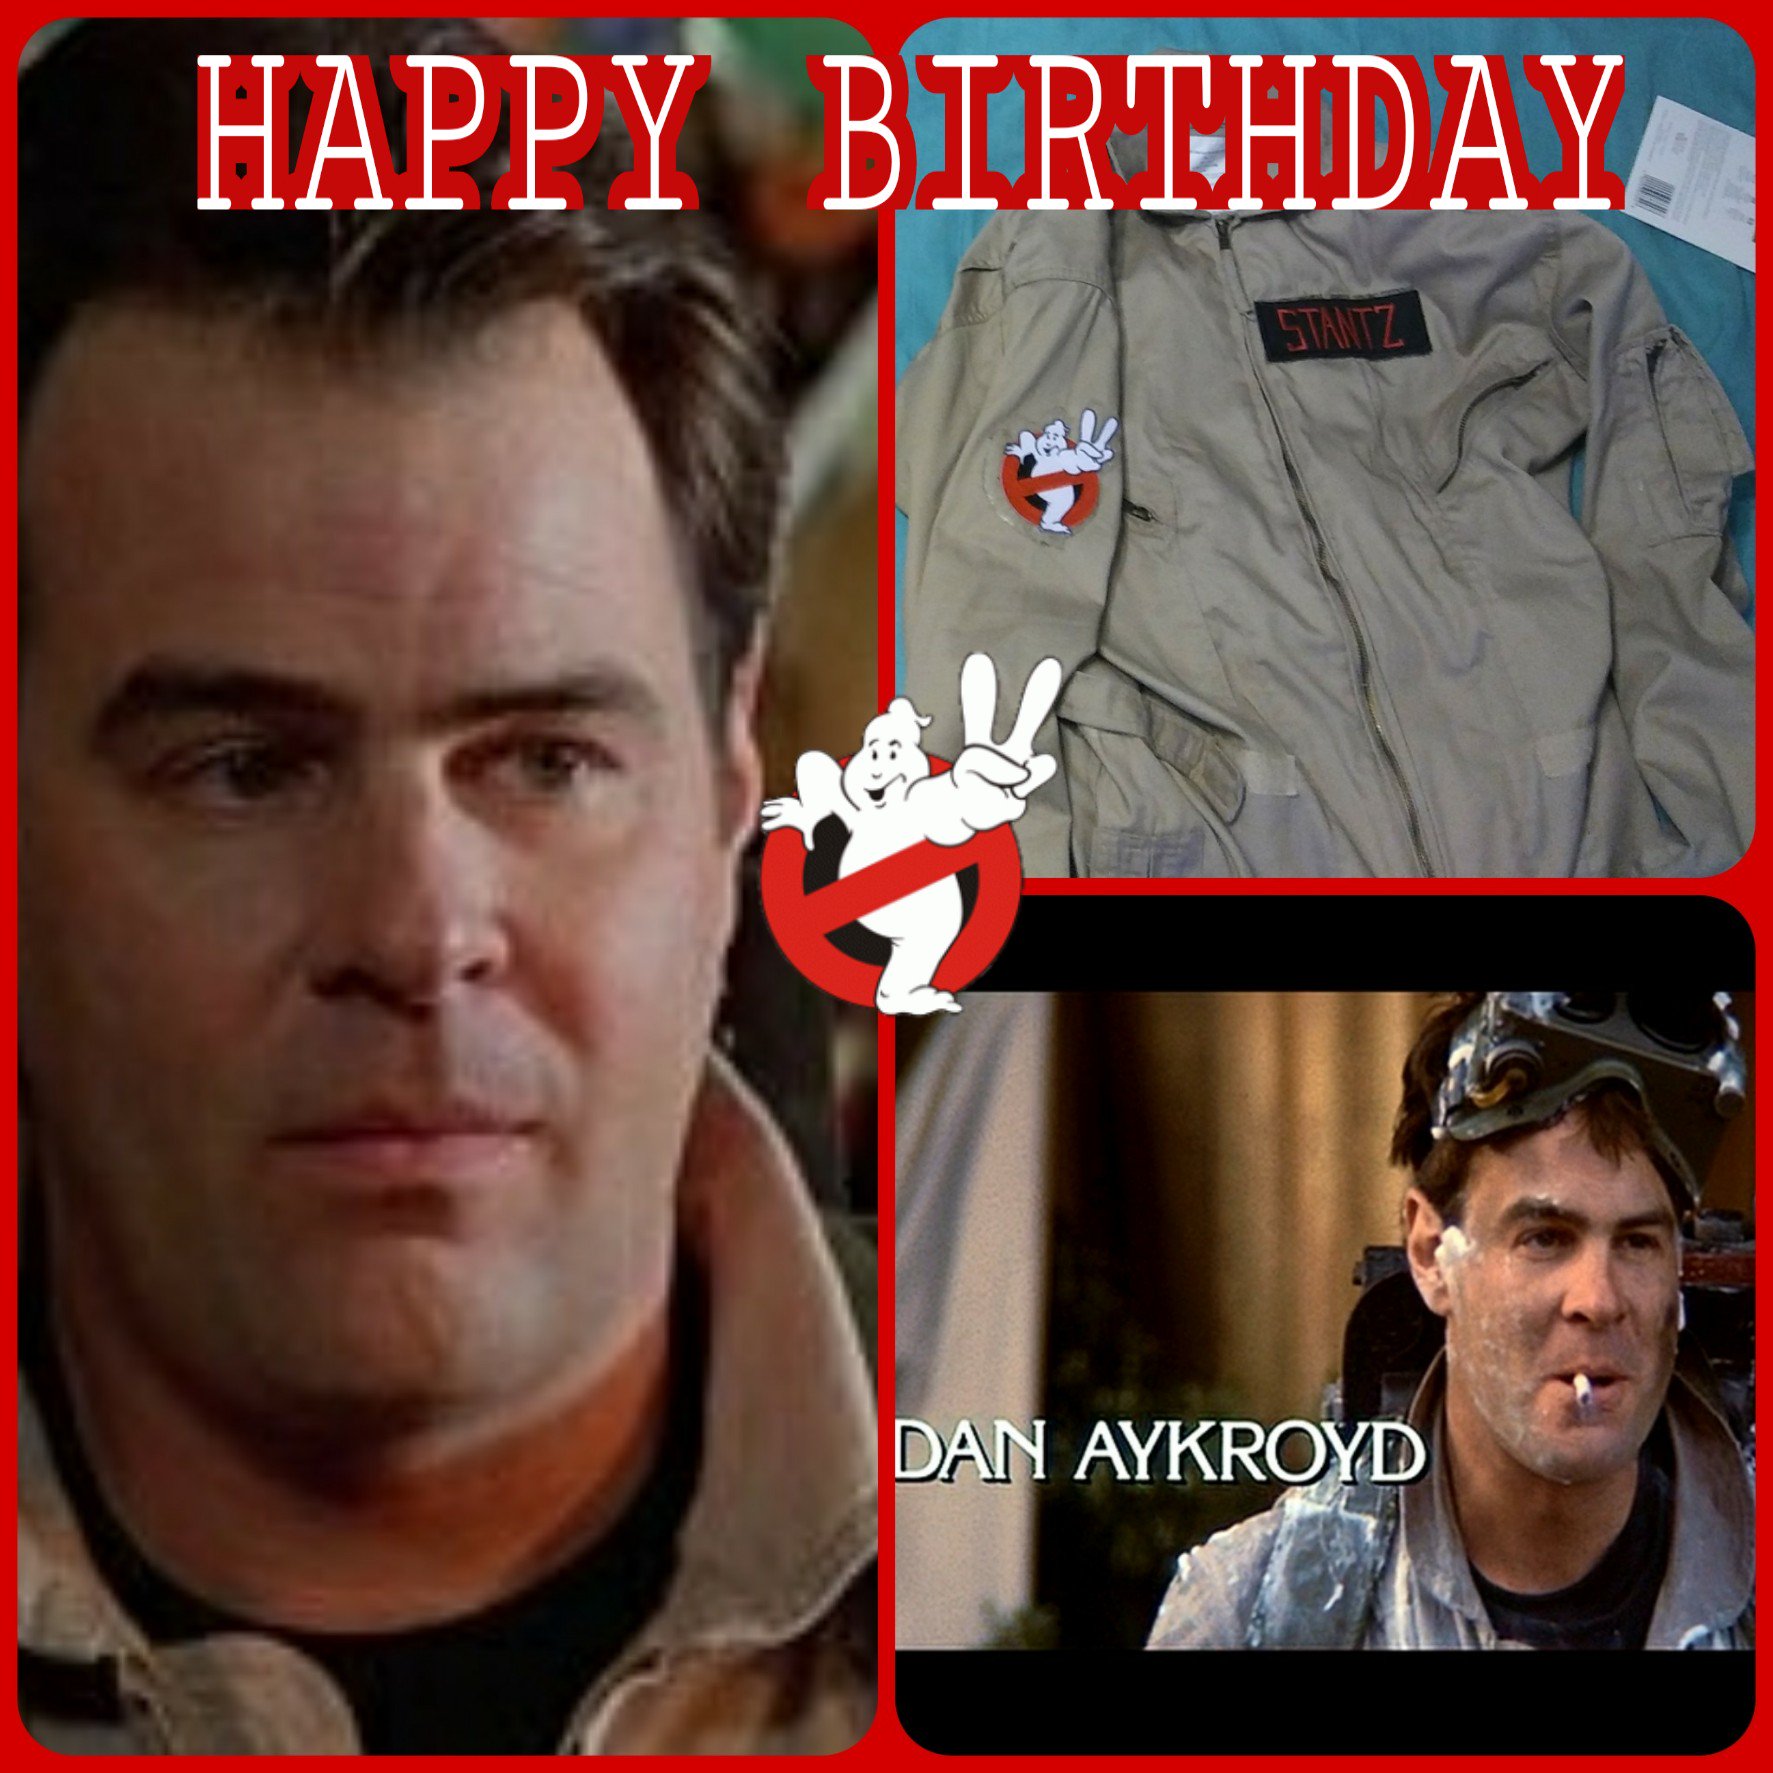  Happy Birthday to you Mr Aykroyd! You are truly the heart of the Ghostbusters! 